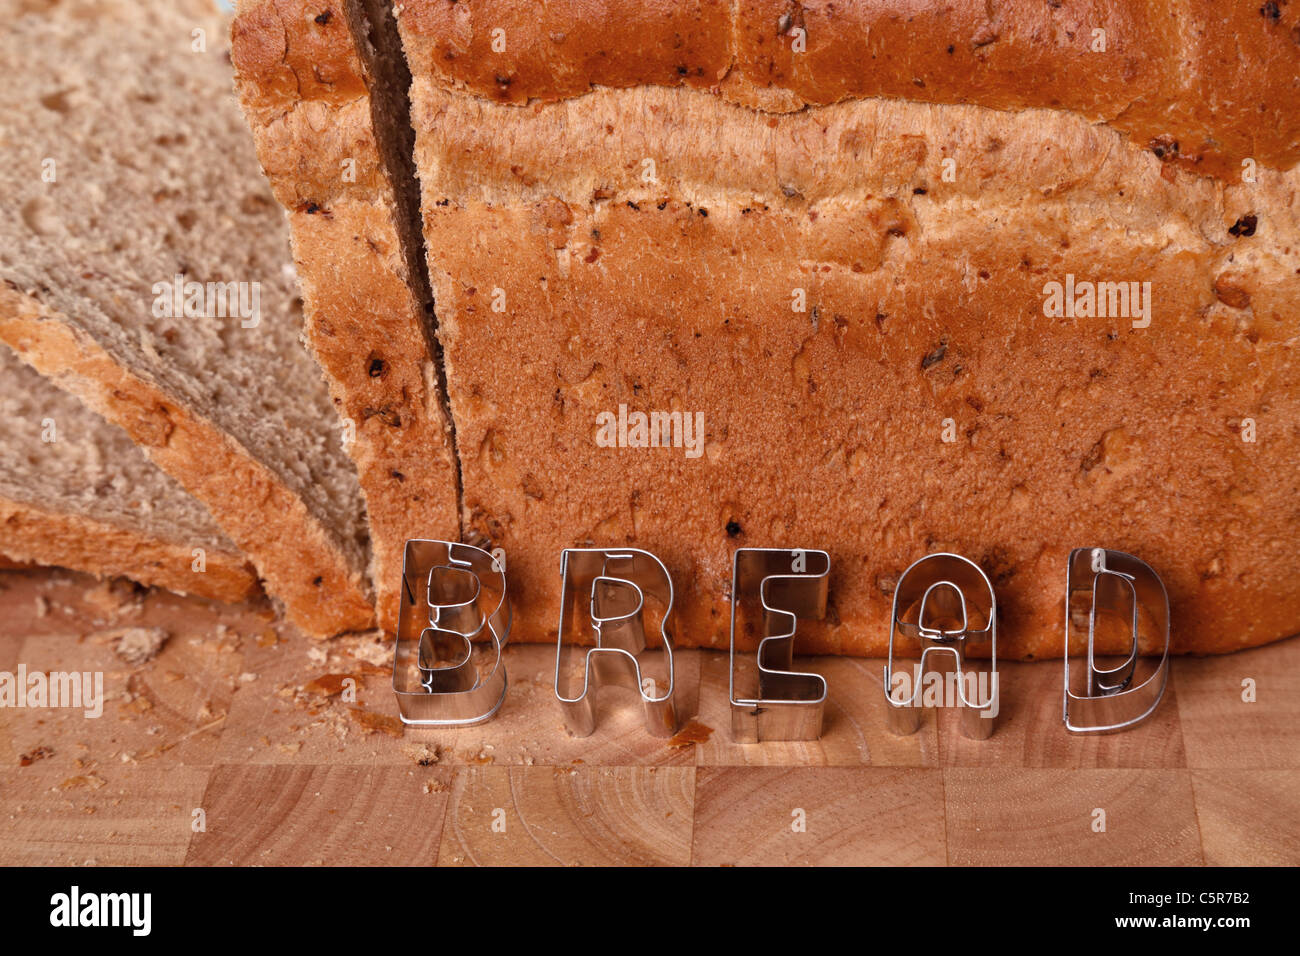 Photo of a loaf of brown bread with the word in in pastry letters. Stock Photo